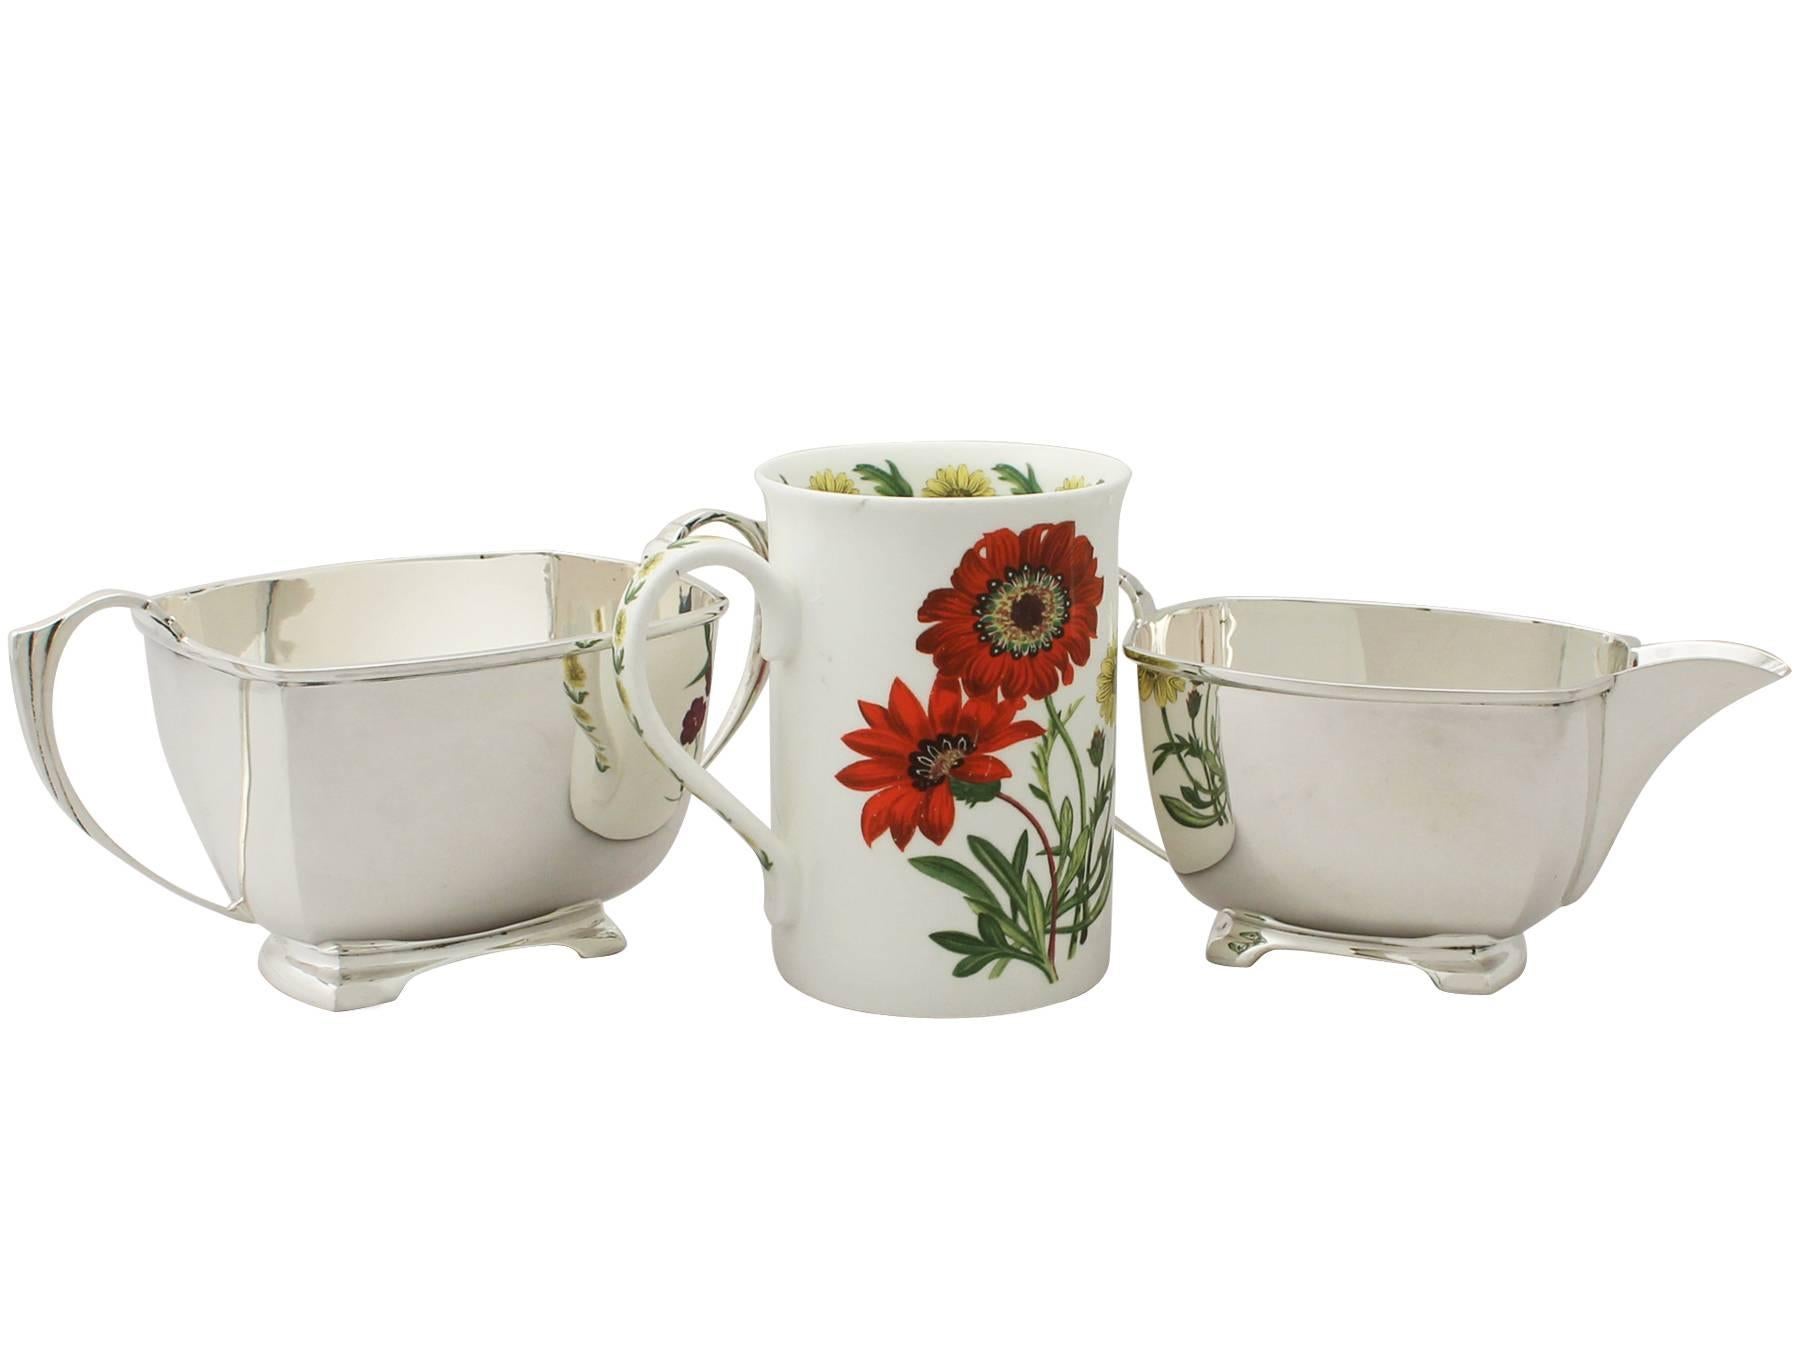 An exceptional, Fine and impressive antique George VI Scottish sterling silver cream jug and sugar bowl made in the Art Deco style; an addition to our sterling teaware collection.

This exceptional antique George VI Scottish sterling silver cream